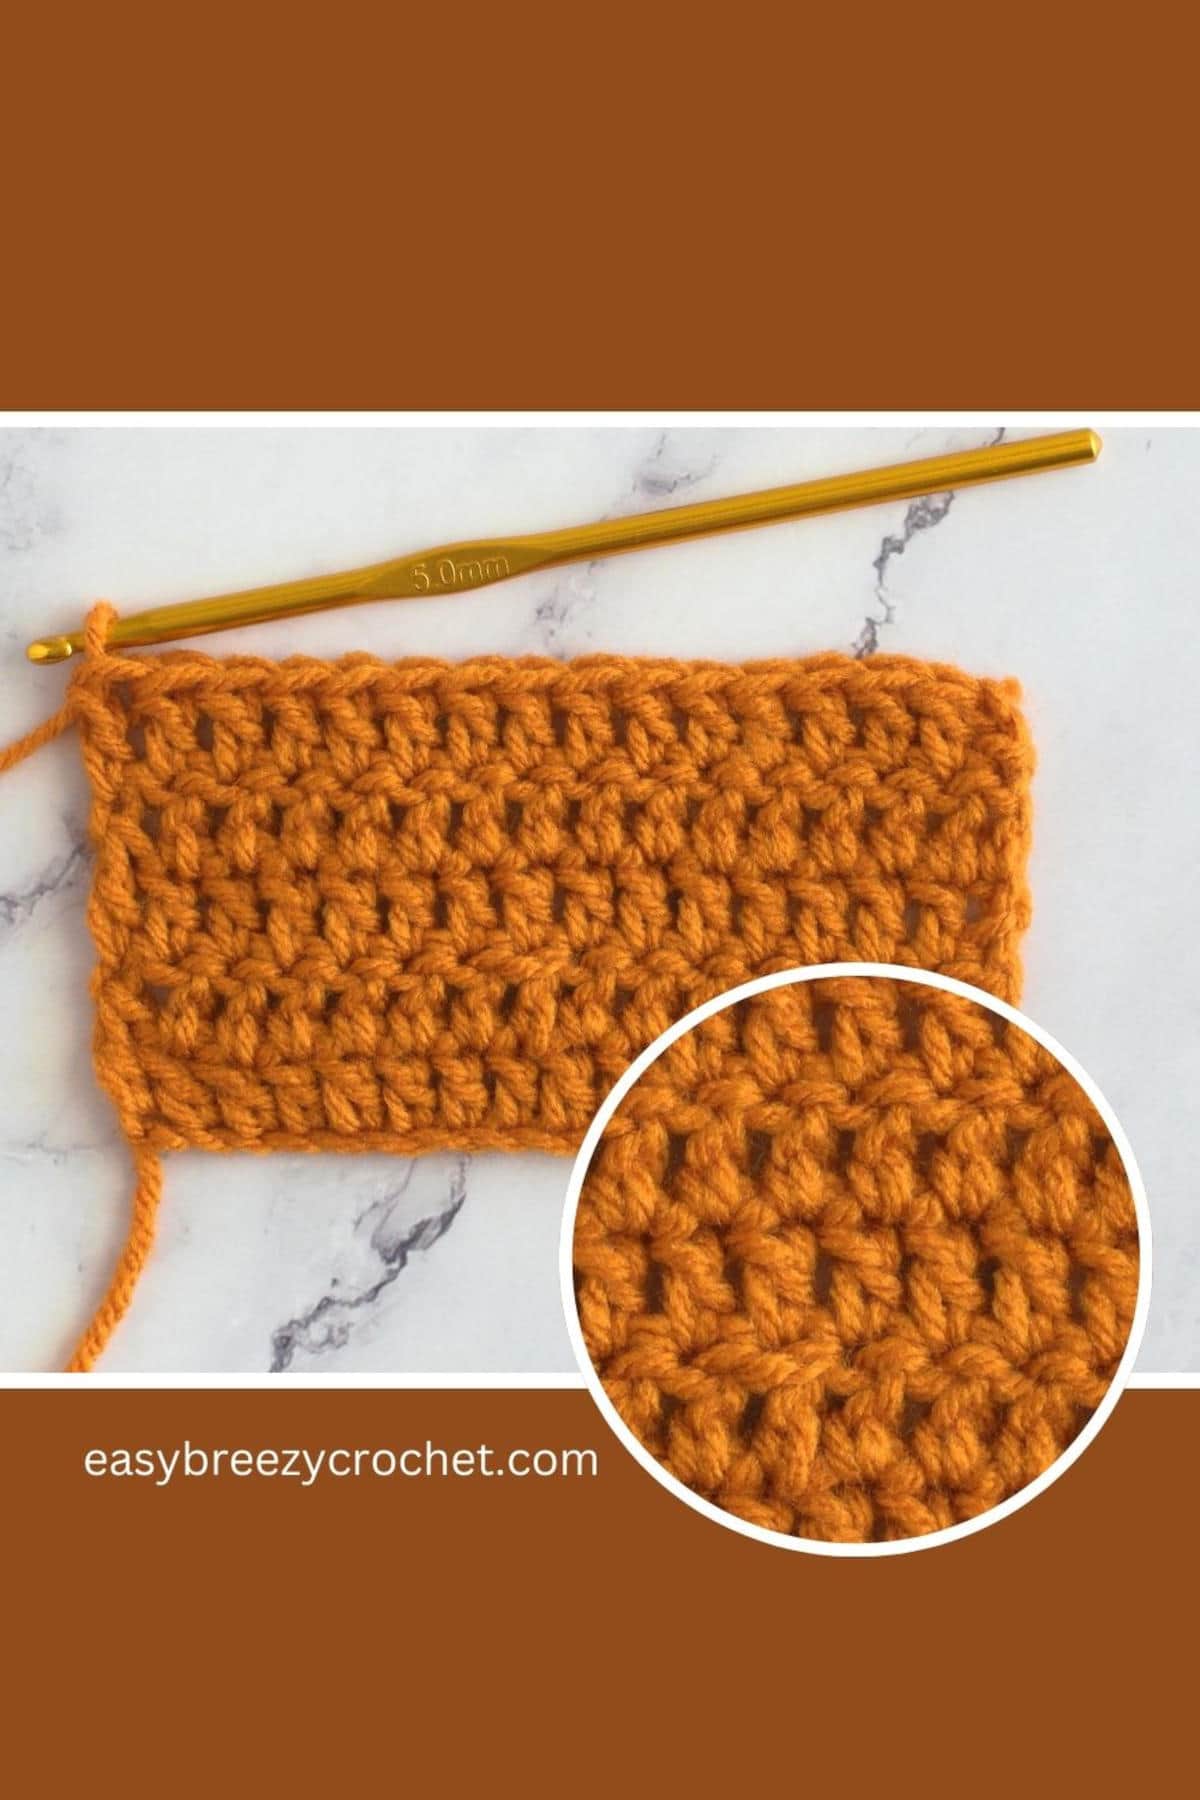 Image of double crochet stitches worked in pumpkin colored yarn.